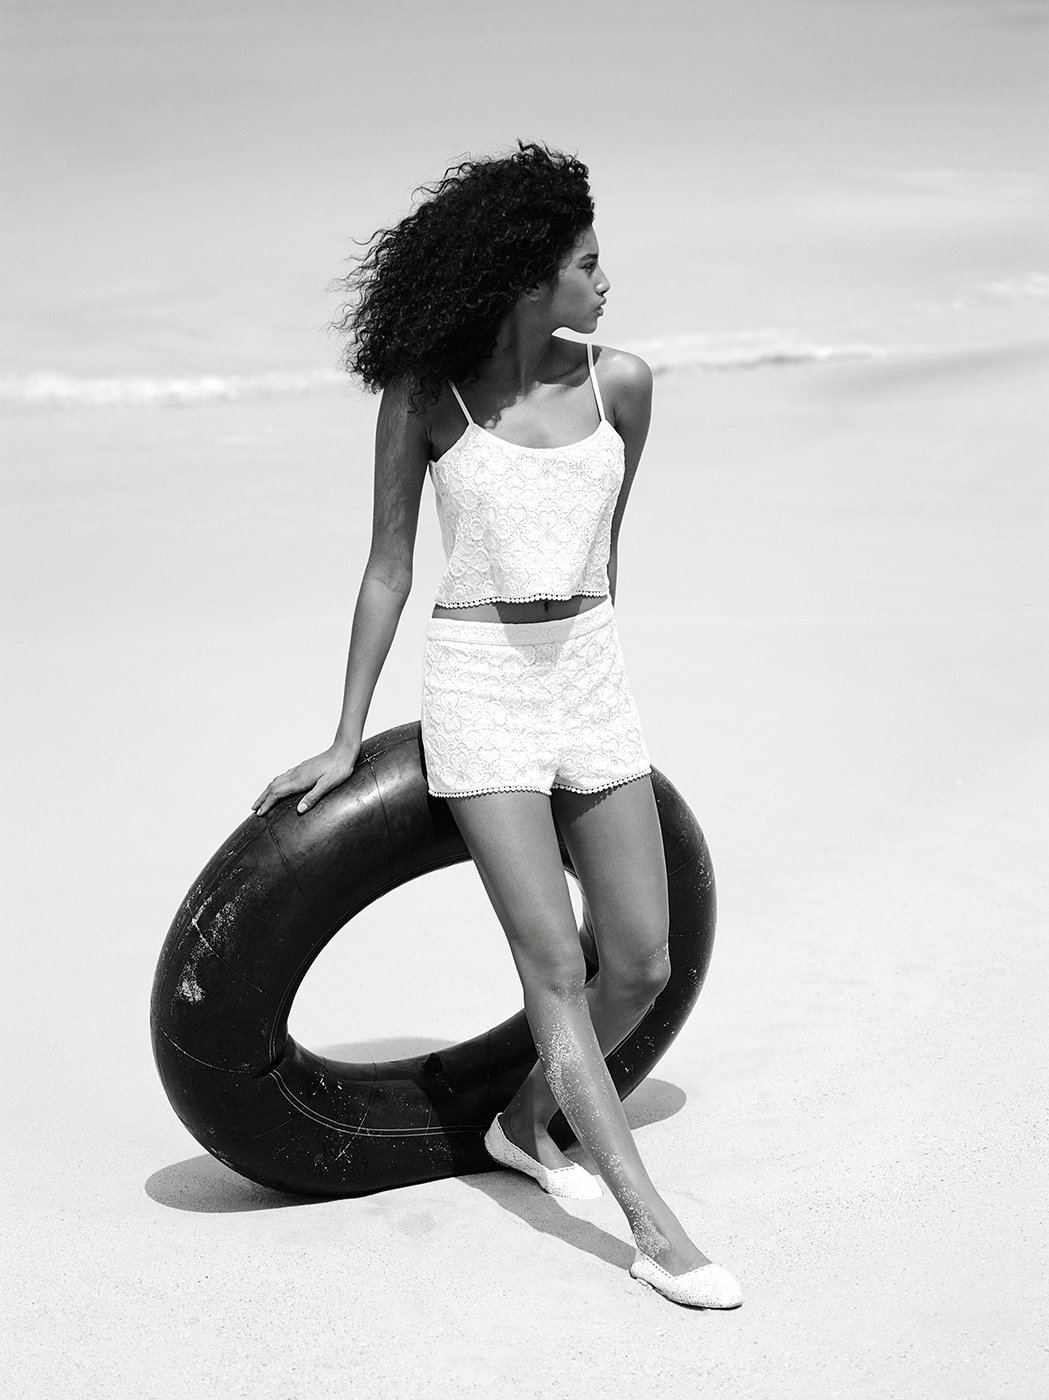 imaan hammam shot by patrik sehlstedt for h&m